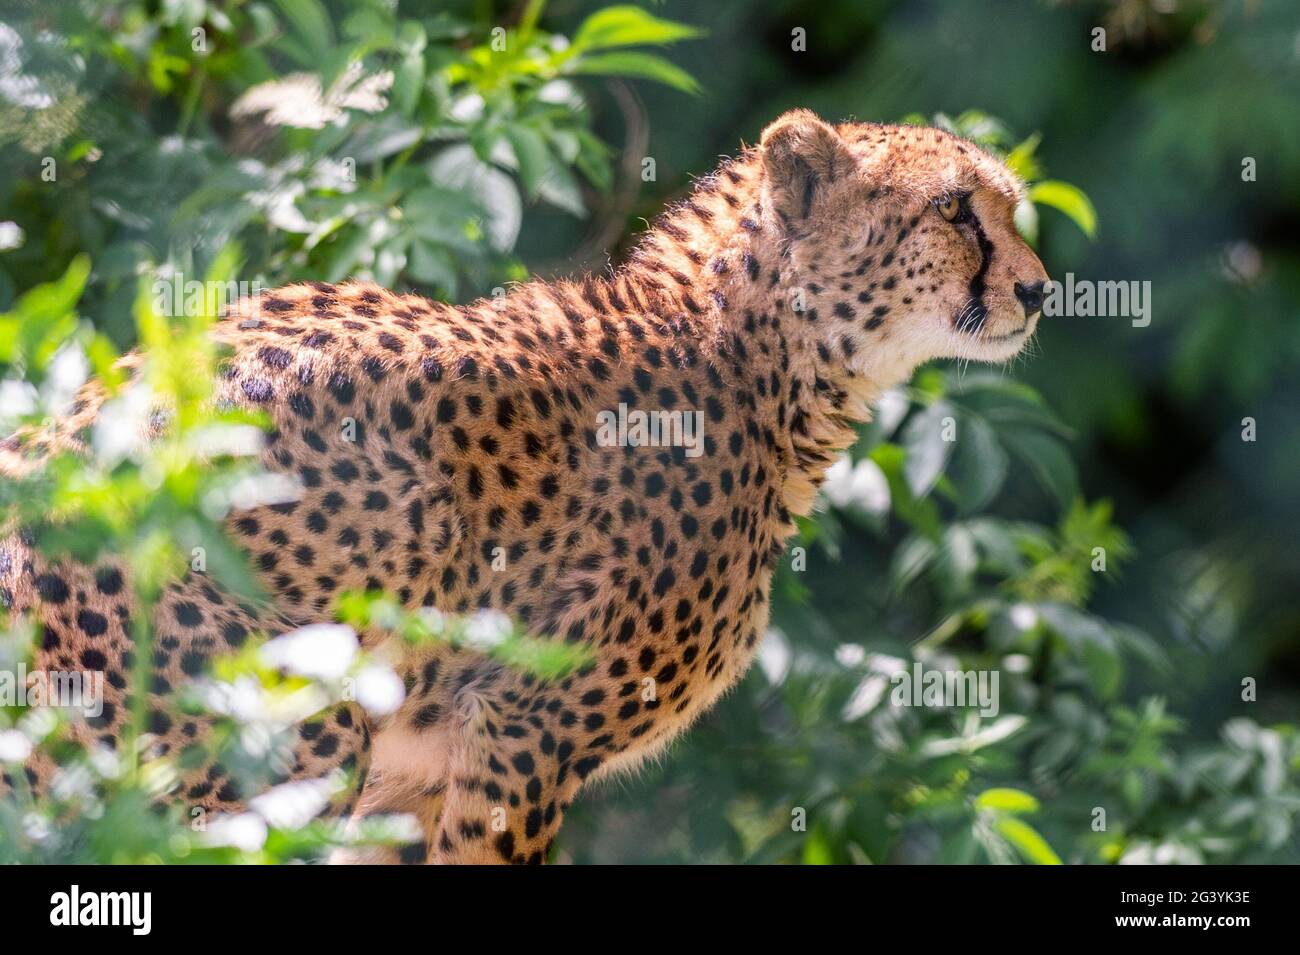 Cobh, County Cork, Ireland. 18th June, 2021. The sunny weather brought out lots of visitors to Fota Wildlife Park in Co. Cork today. The cheetahs were enjoying the sun. Credit: AG News/Alamy Live News Stock Photo